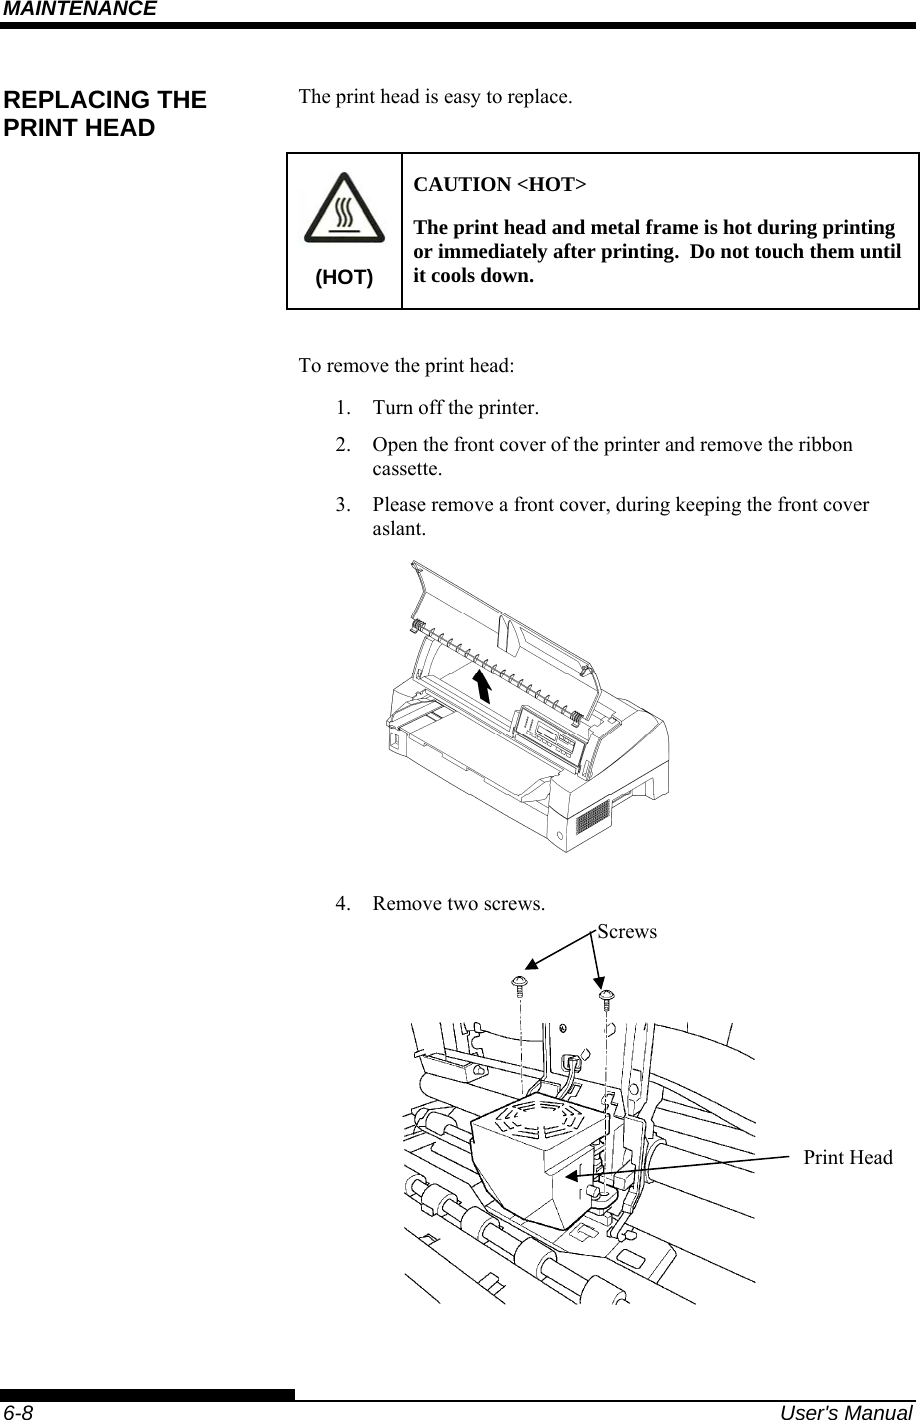 MAINTENANCE    6-8  User&apos;s Manual The print head is easy to replace.   (HOT) CAUTION &lt;HOT&gt; The print head and metal frame is hot during printing or immediately after printing.  Do not touch them until it cools down.  To remove the print head: 1.  Turn off the printer. 2.  Open the front cover of the printer and remove the ribbon cassette. 3.  Please remove a front cover, during keeping the front cover aslant.   4.  Remove two screws.      REPLACING THE PRINT HEAD Screws Print Head 